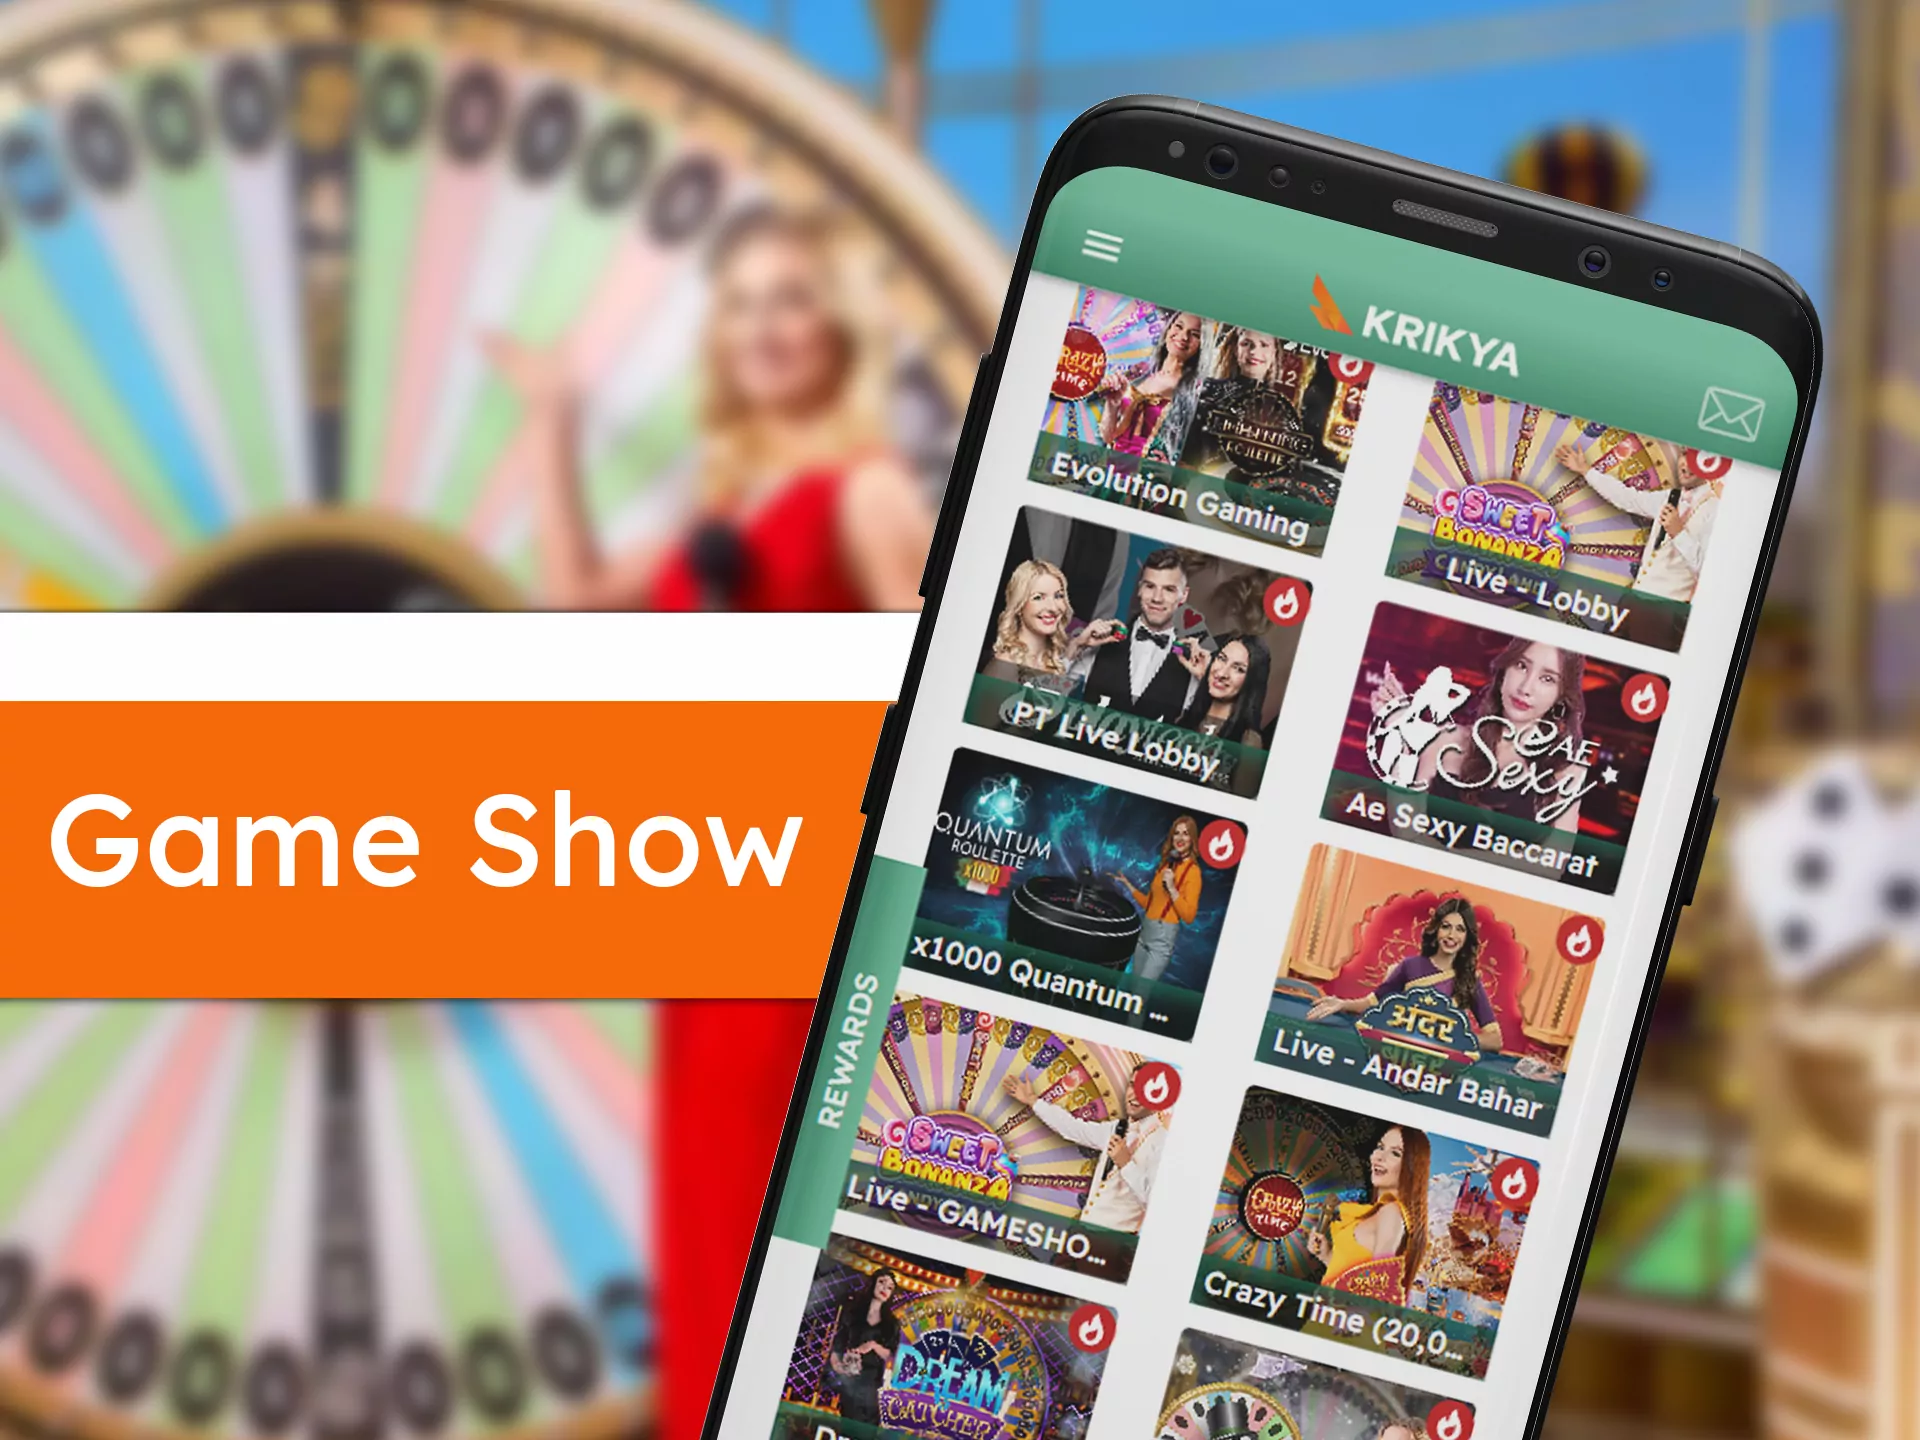 Make your casino playing much enjoyable with Krikya live game shows.